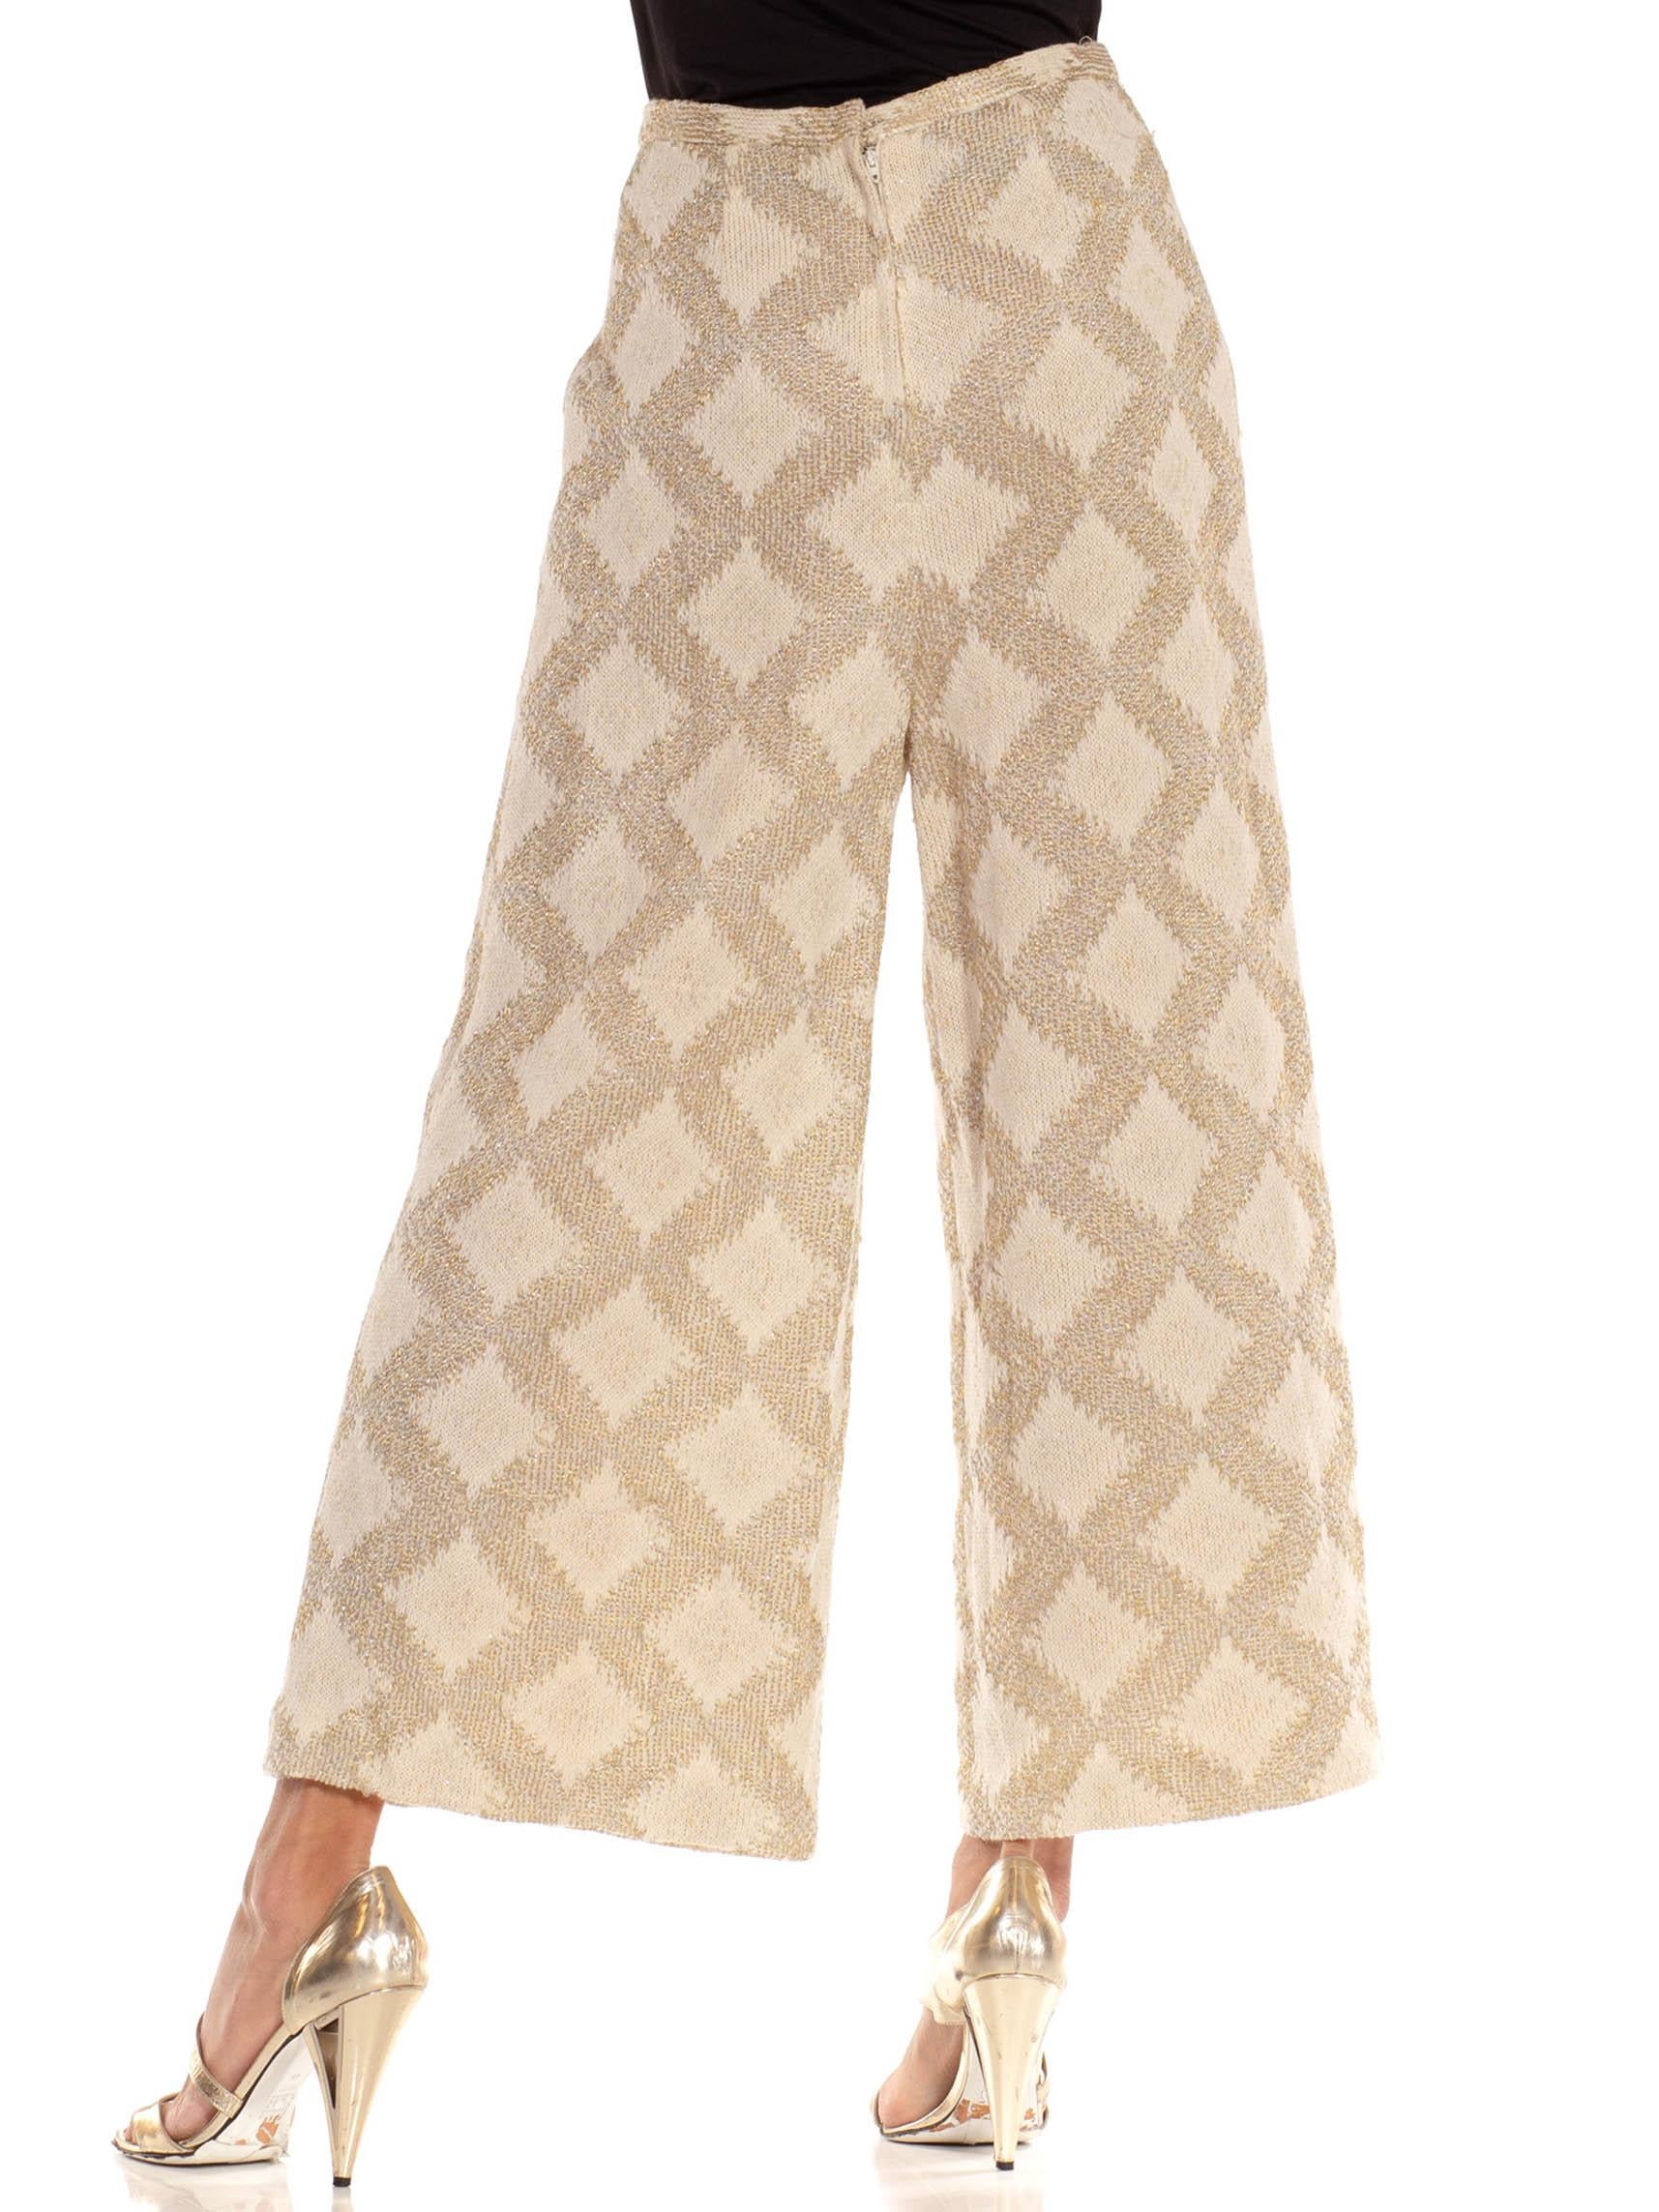 1970S Metallic Gold Poly Lurex Knit Bell Bottom Pants In Excellent Condition For Sale In New York, NY